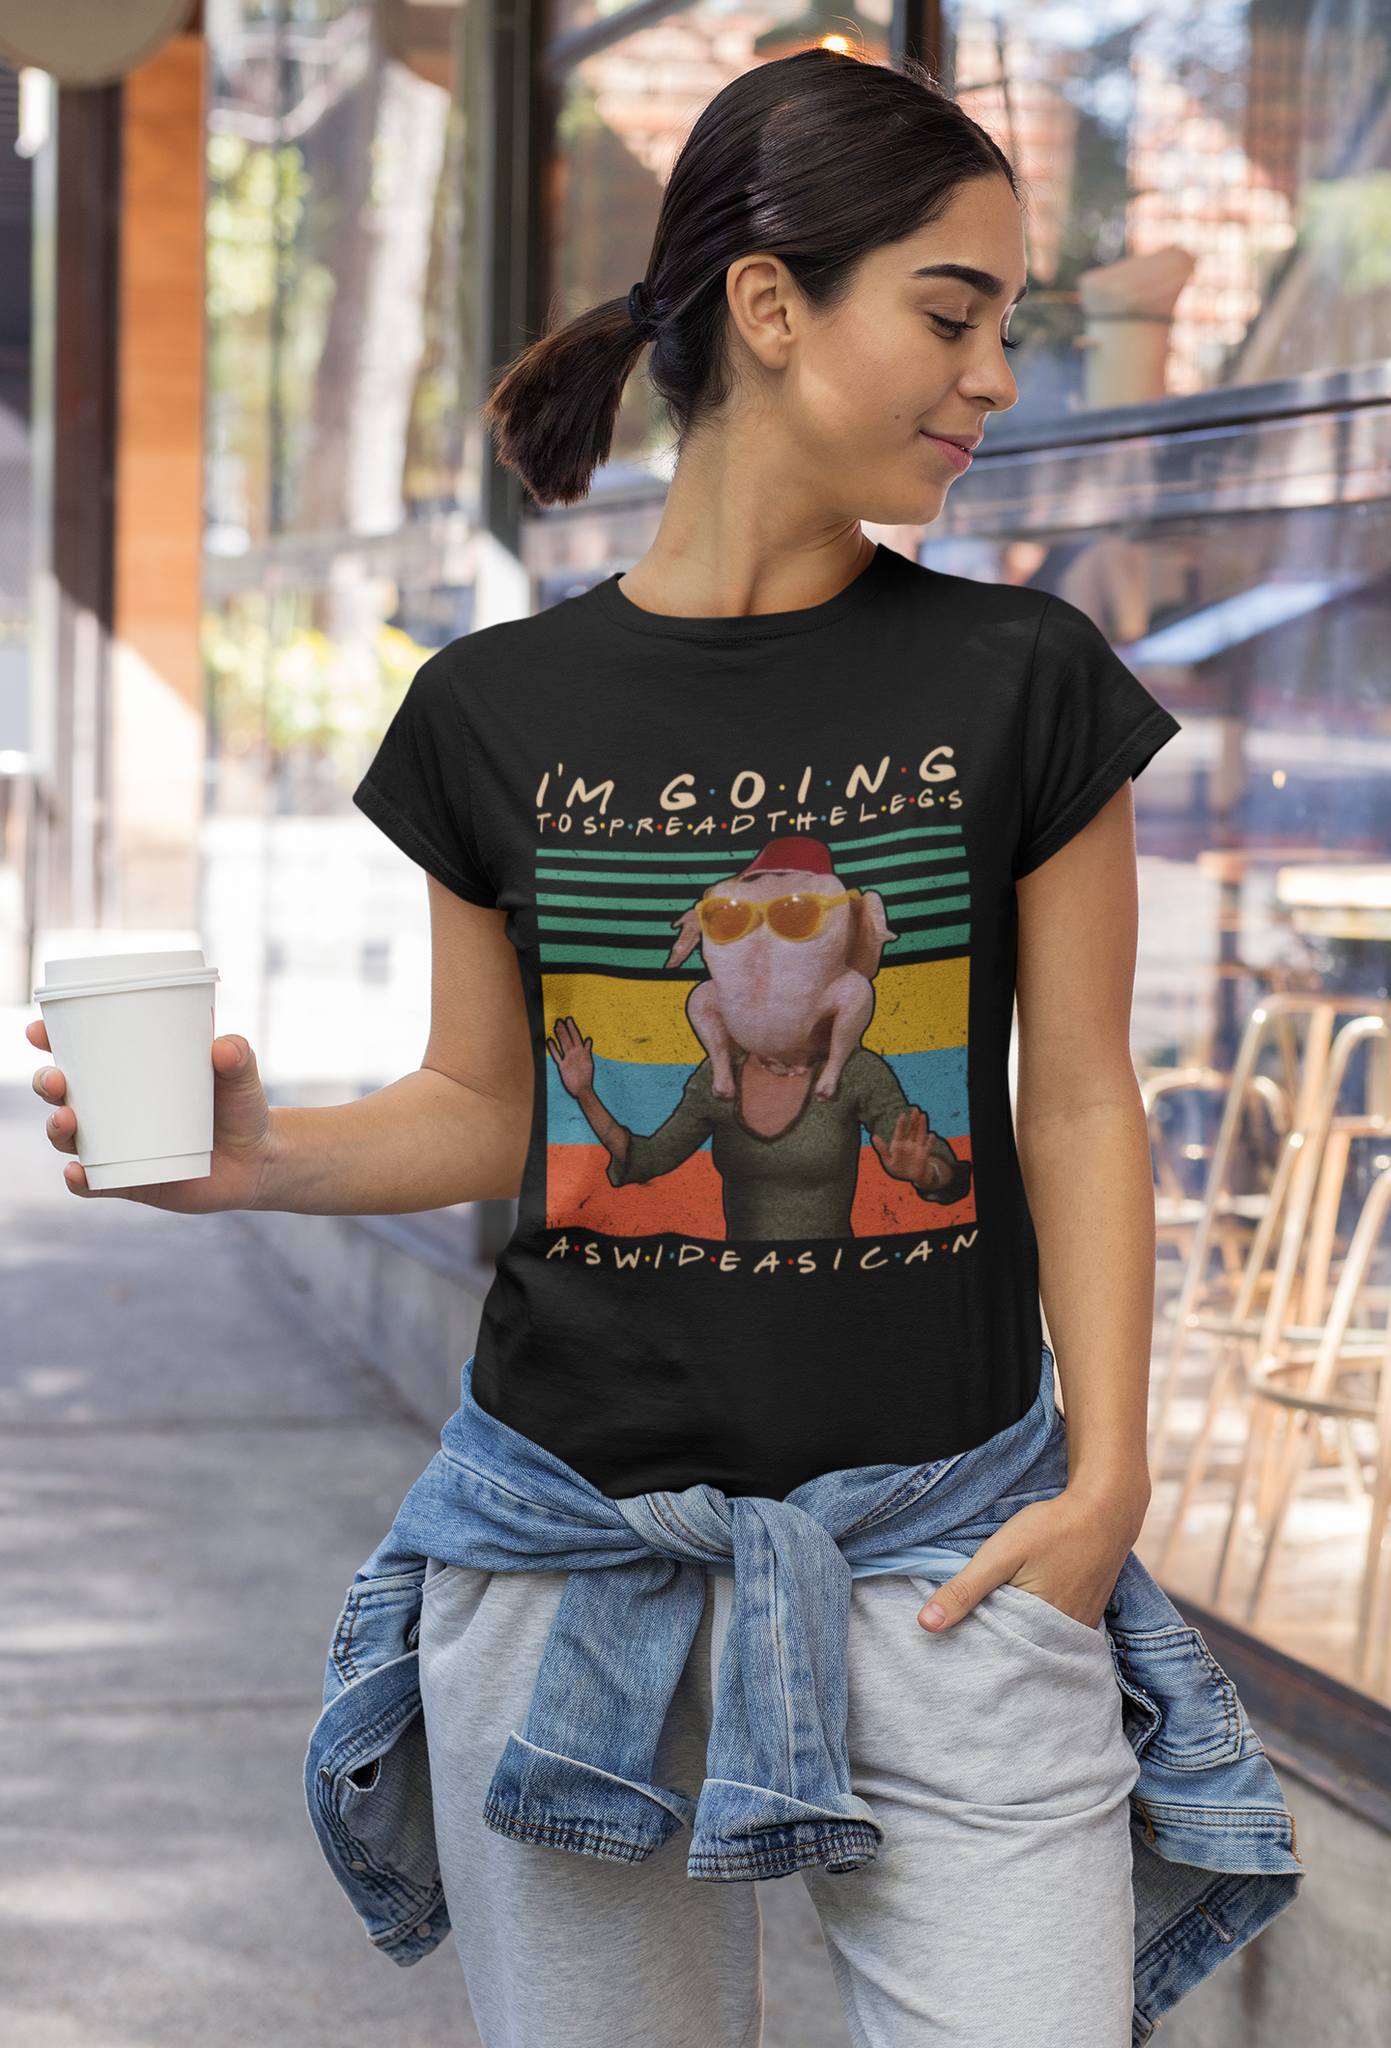 Friends TV Show Vintage T Shirt, Monica T Shirt, Im Going To Spread The Legs As Wide As I Can Tshirt